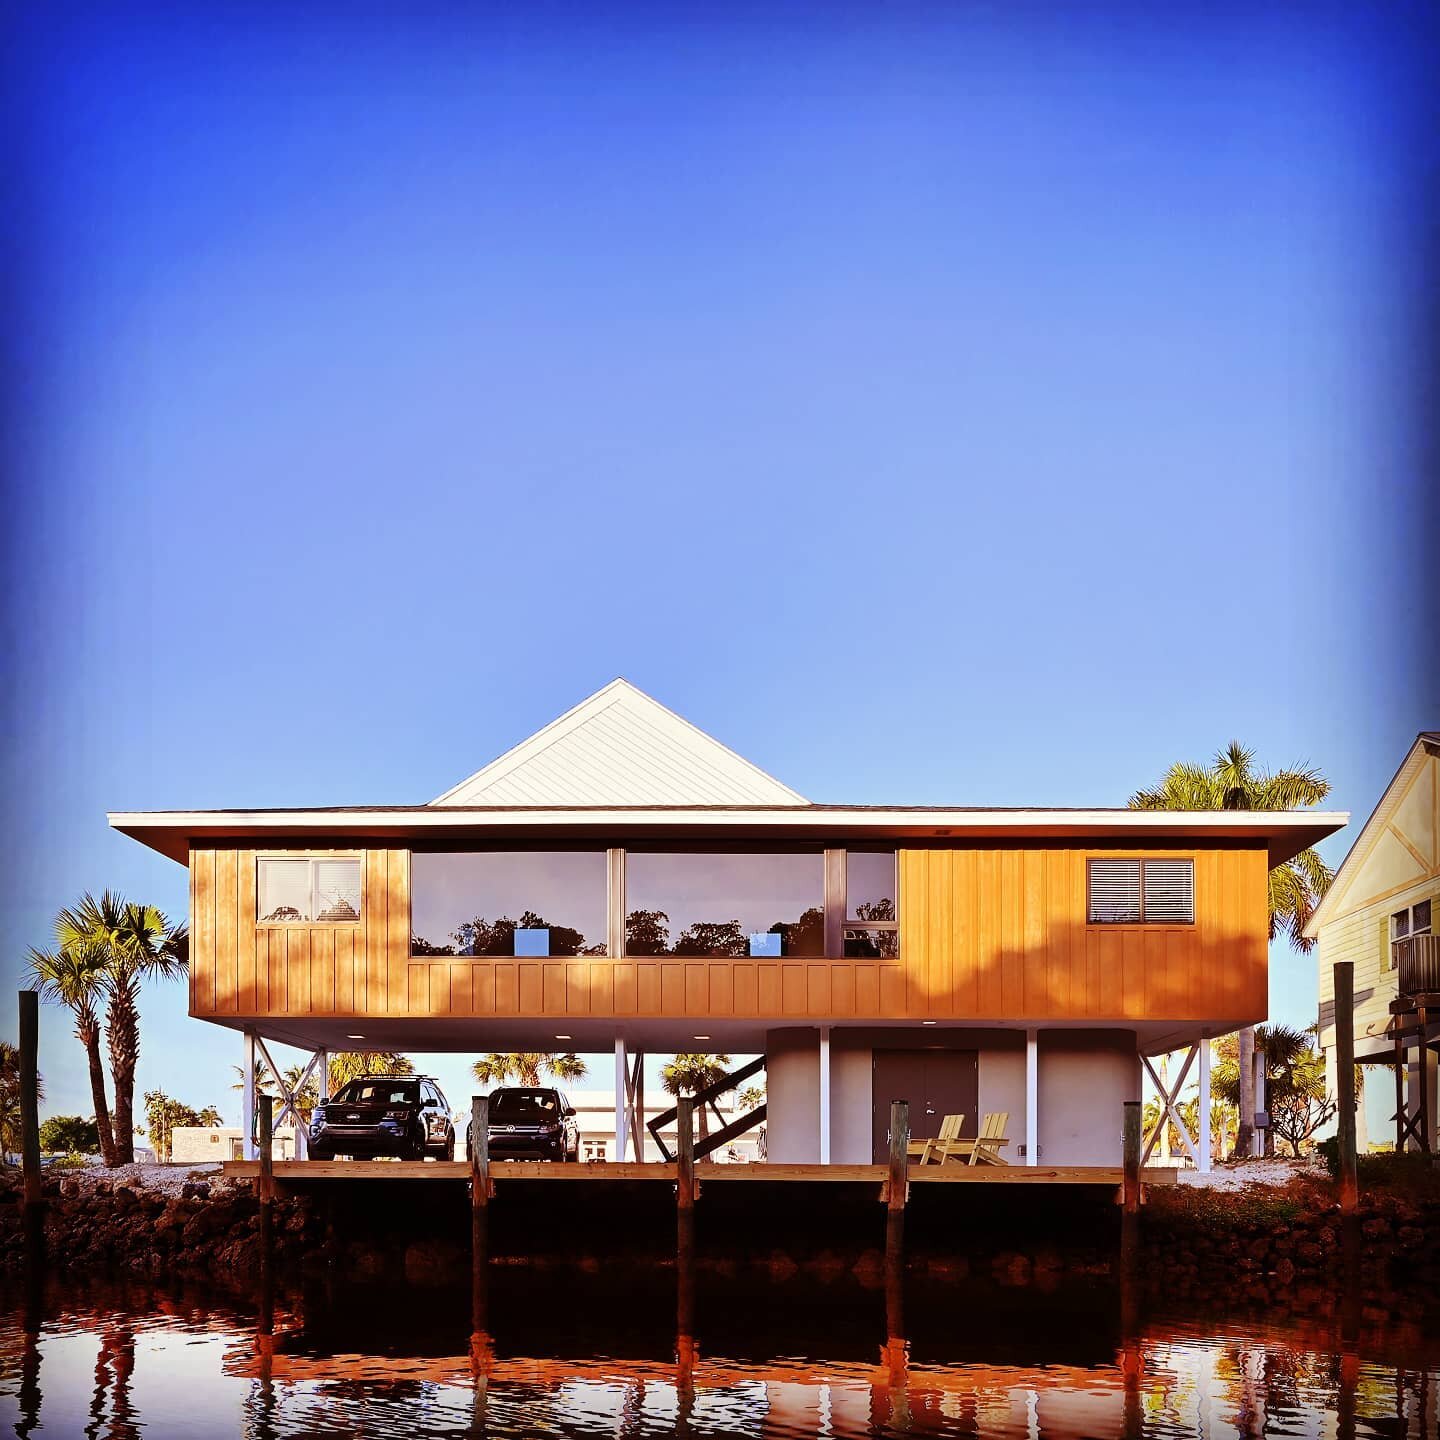 The recently completed #cypresscottage  Located in storied Everglades City facing the edge of #bigcypress National Preserve. 

#architecture #design #floridamodern  #realestate #naples #architectdeveloper #thecypresscottage